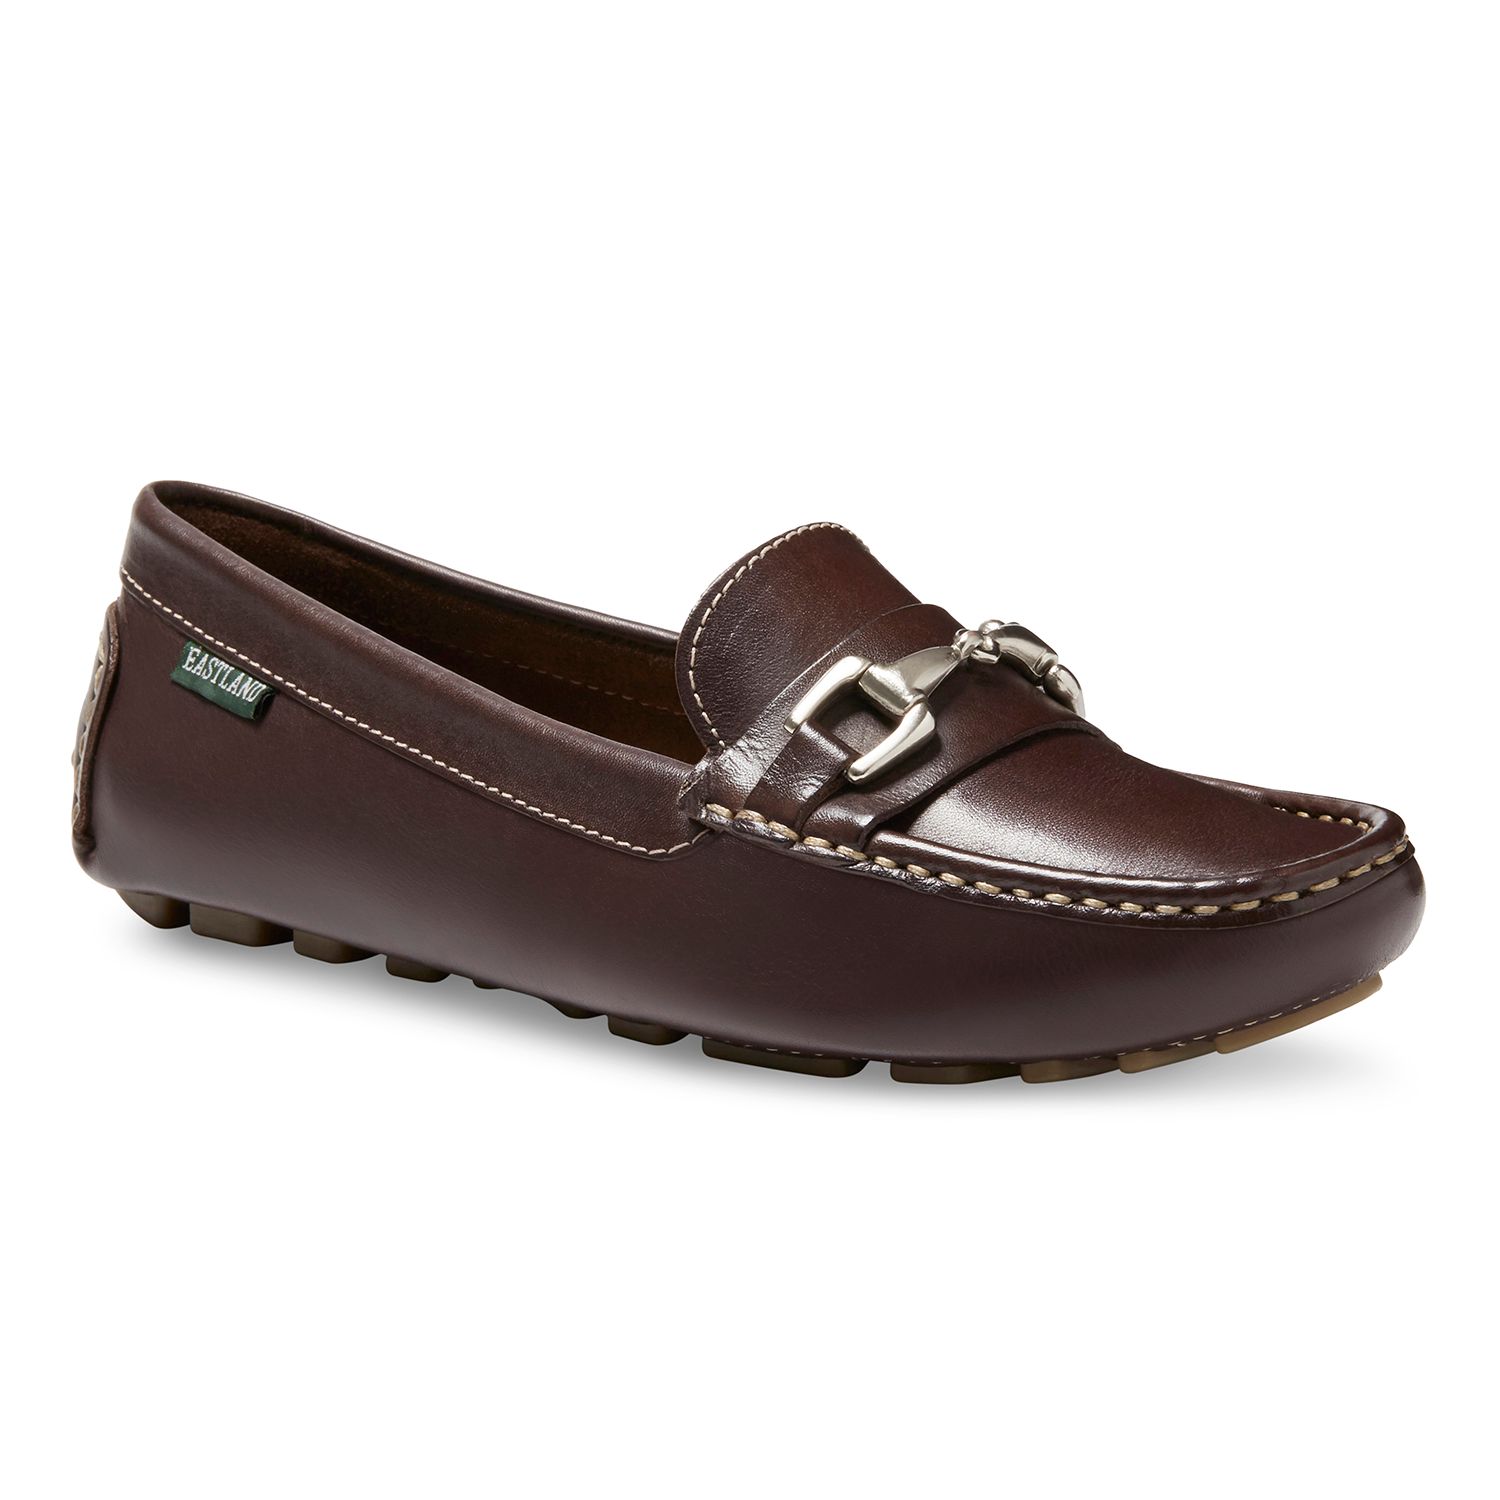 Women's Loafers: Slip On A Pair of 